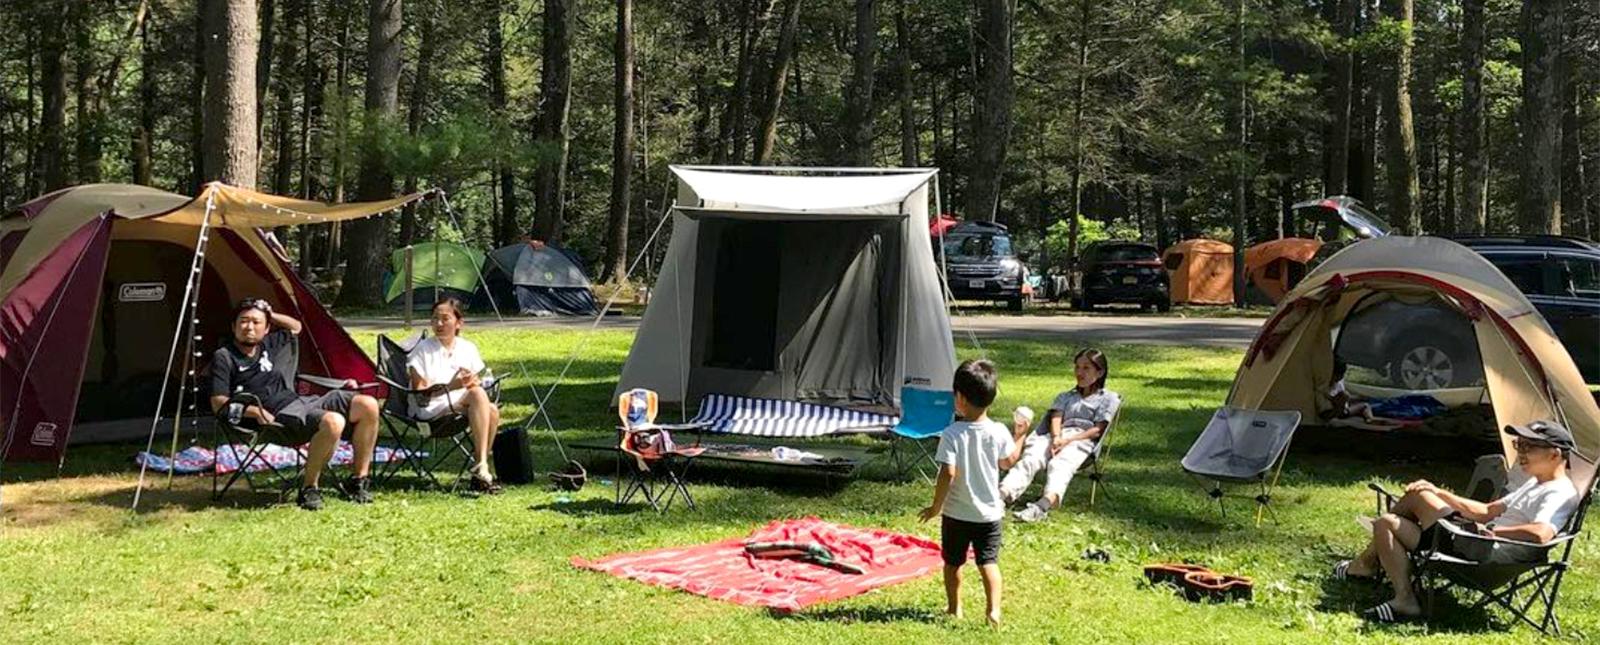 A family sitting at a campsite in the summer (Instagram@inouehd)